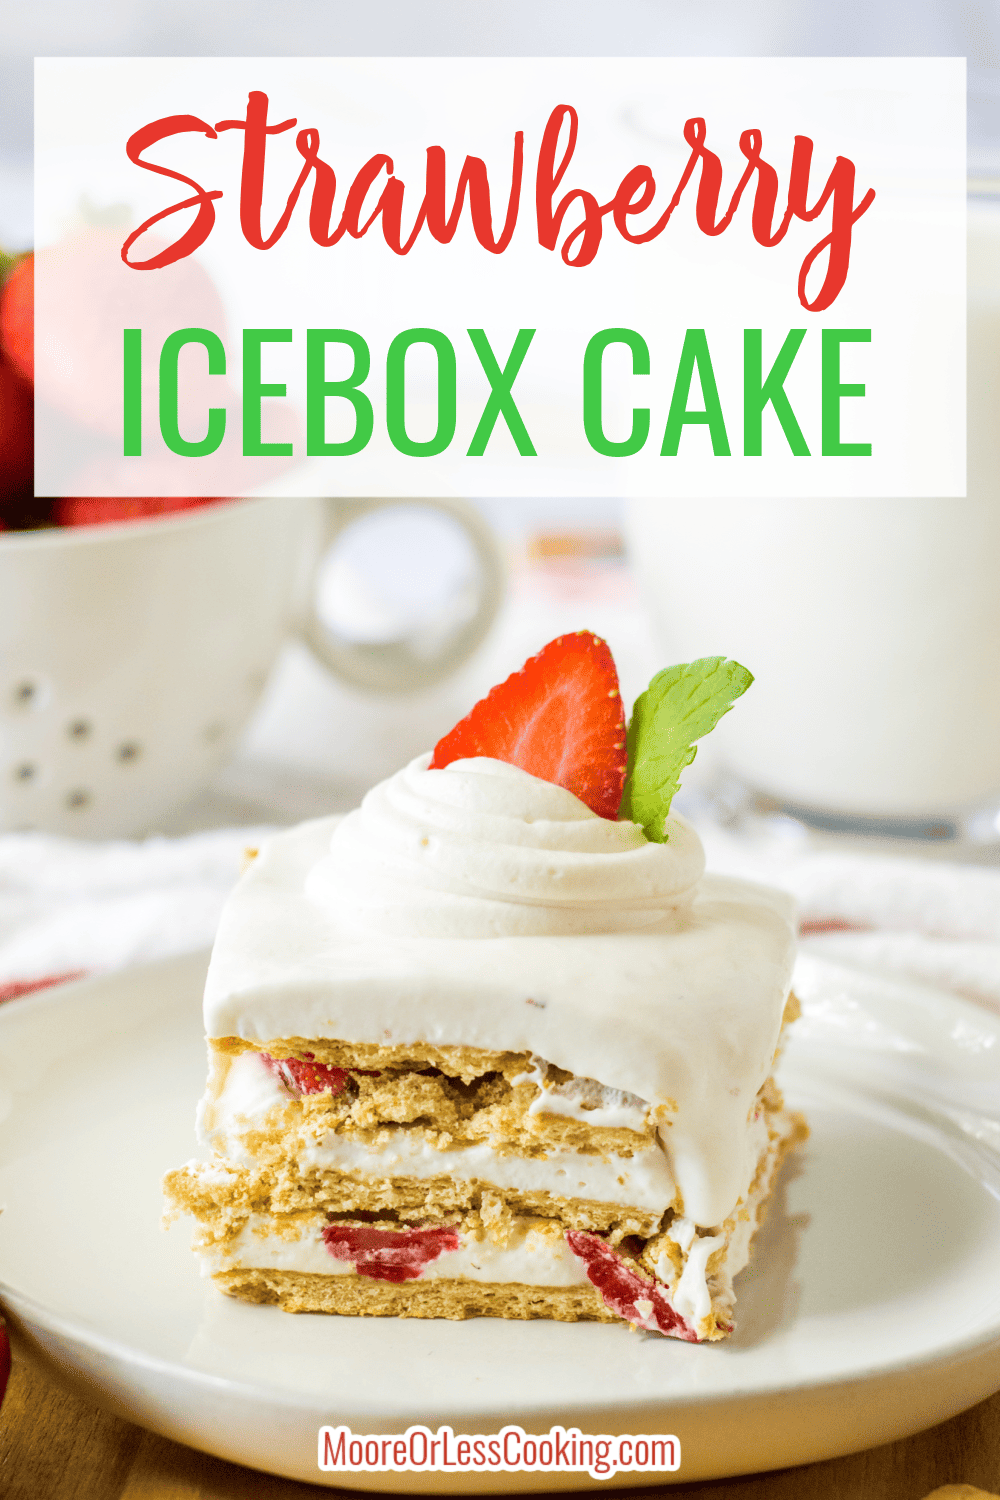 With just a handful of ingredients, you can quickly whip up this Strawberry Icebox Cake for your next summer event. Sandwiched between layers of graham crackers is a sweetened cream cheese filling whipped to fluffiness and flavored with strawberries. Build the layers for a stacked no-bake dessert perfect for summer potlucks and BBQs. via @Mooreorlesscook